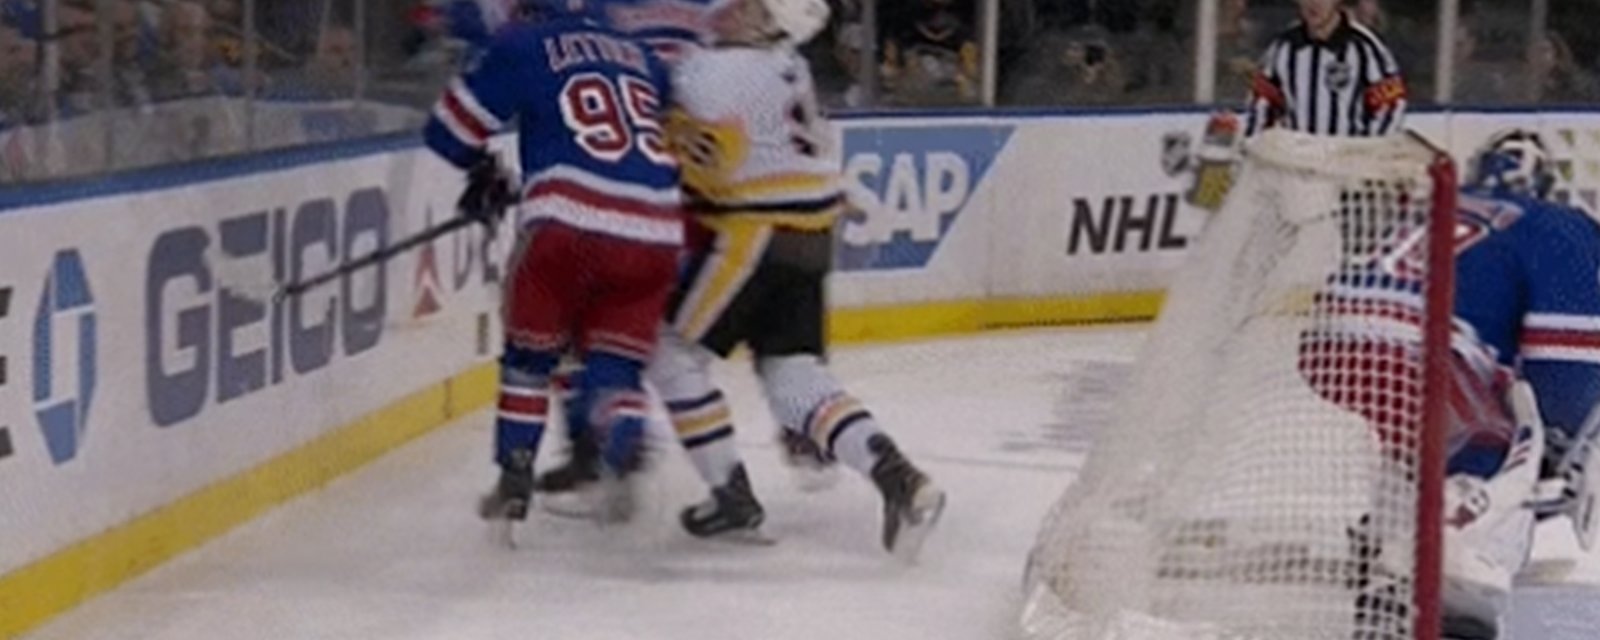 DeAngelo rocks McCann with headshot while the ref looks on